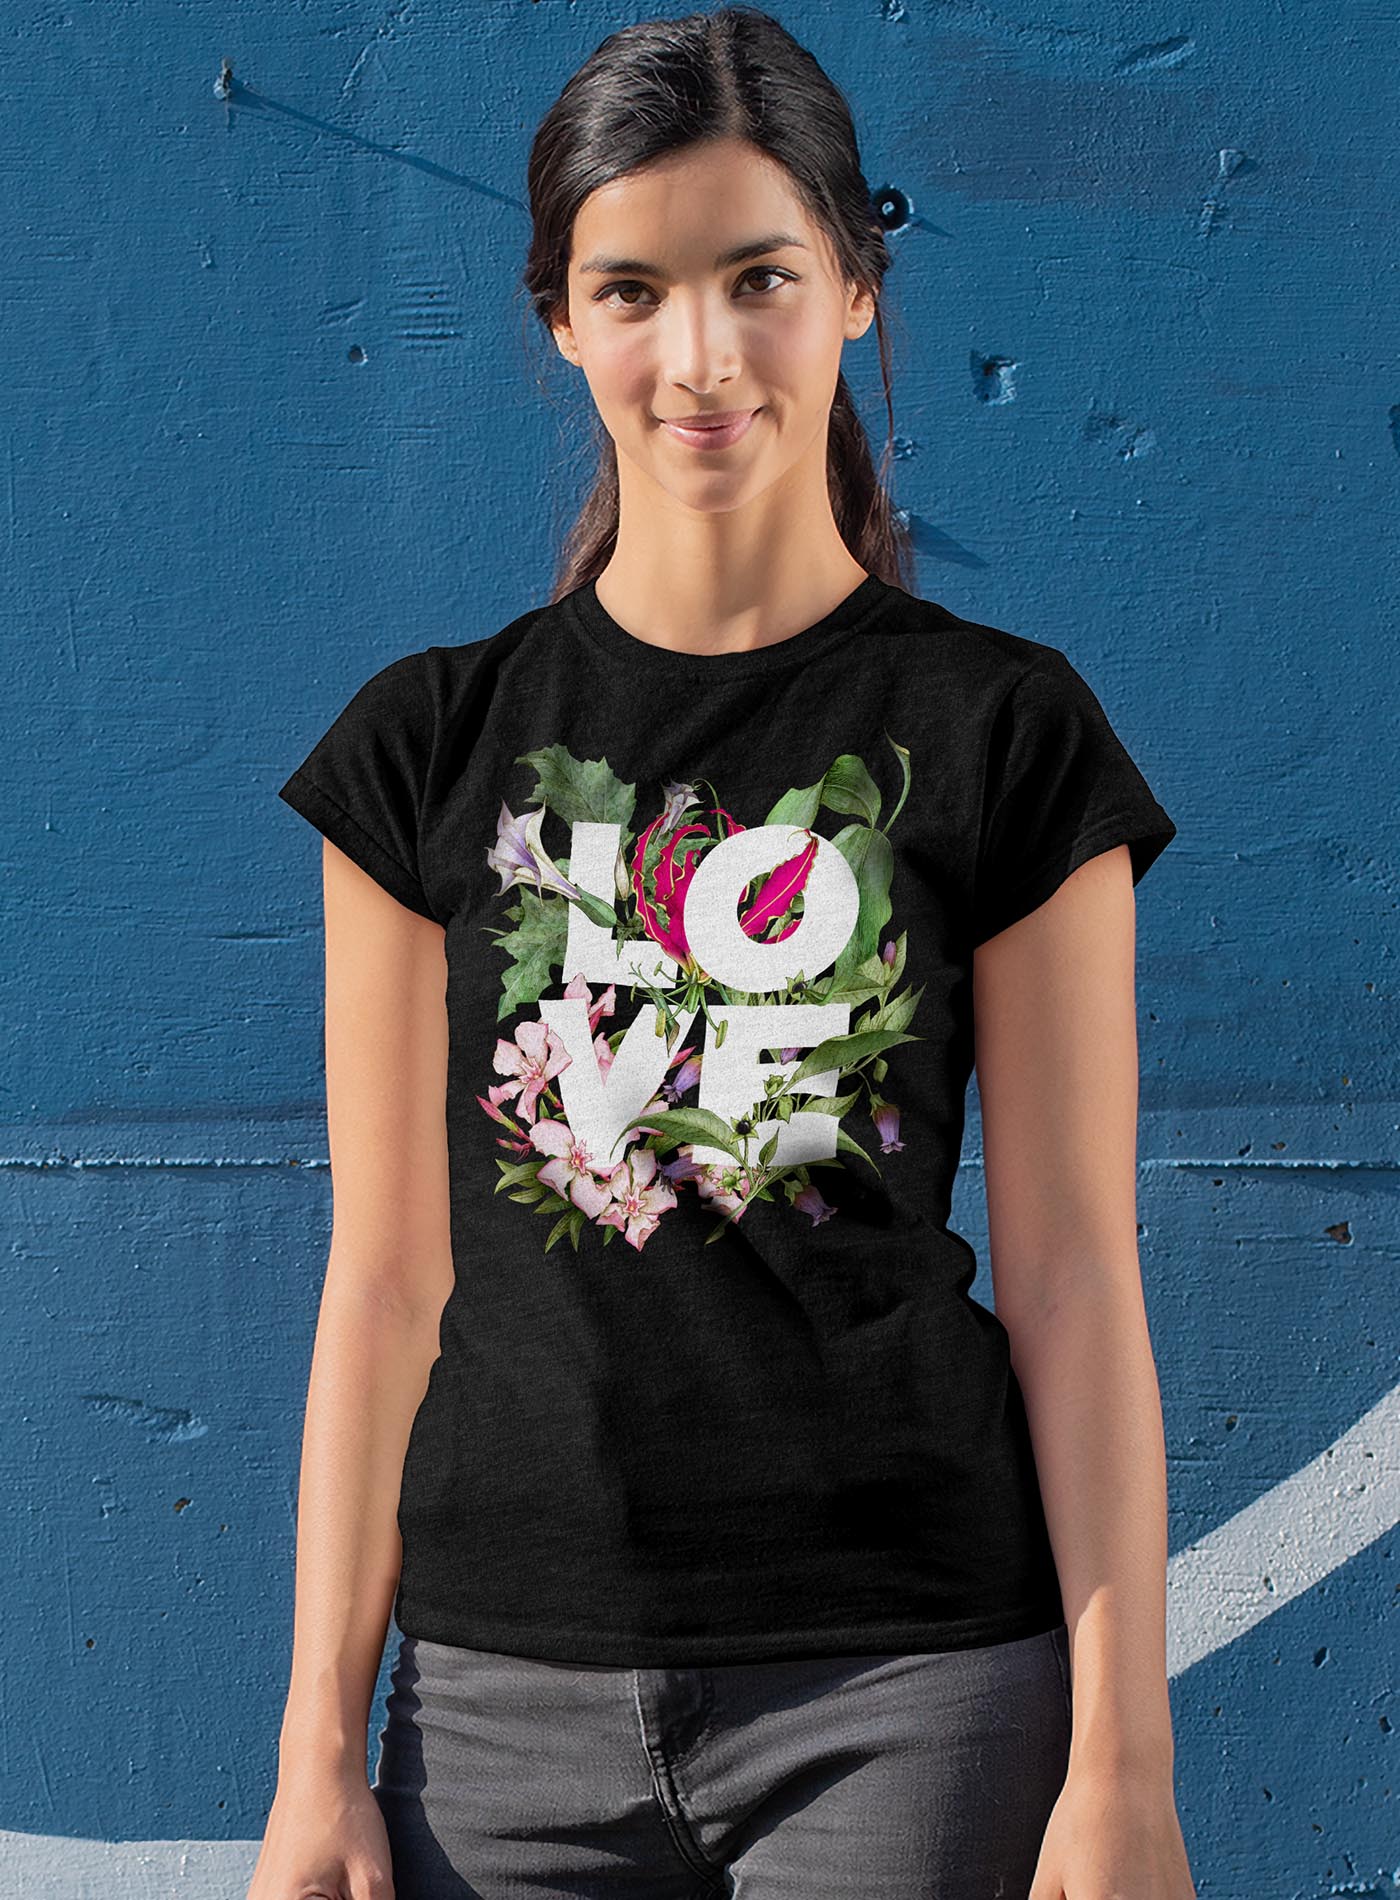 Woman modeling a black woman's t-shirt featuring the word LOVE surrounded by poisonous flowers such as oleander, fire lily, belladonna and toloache.